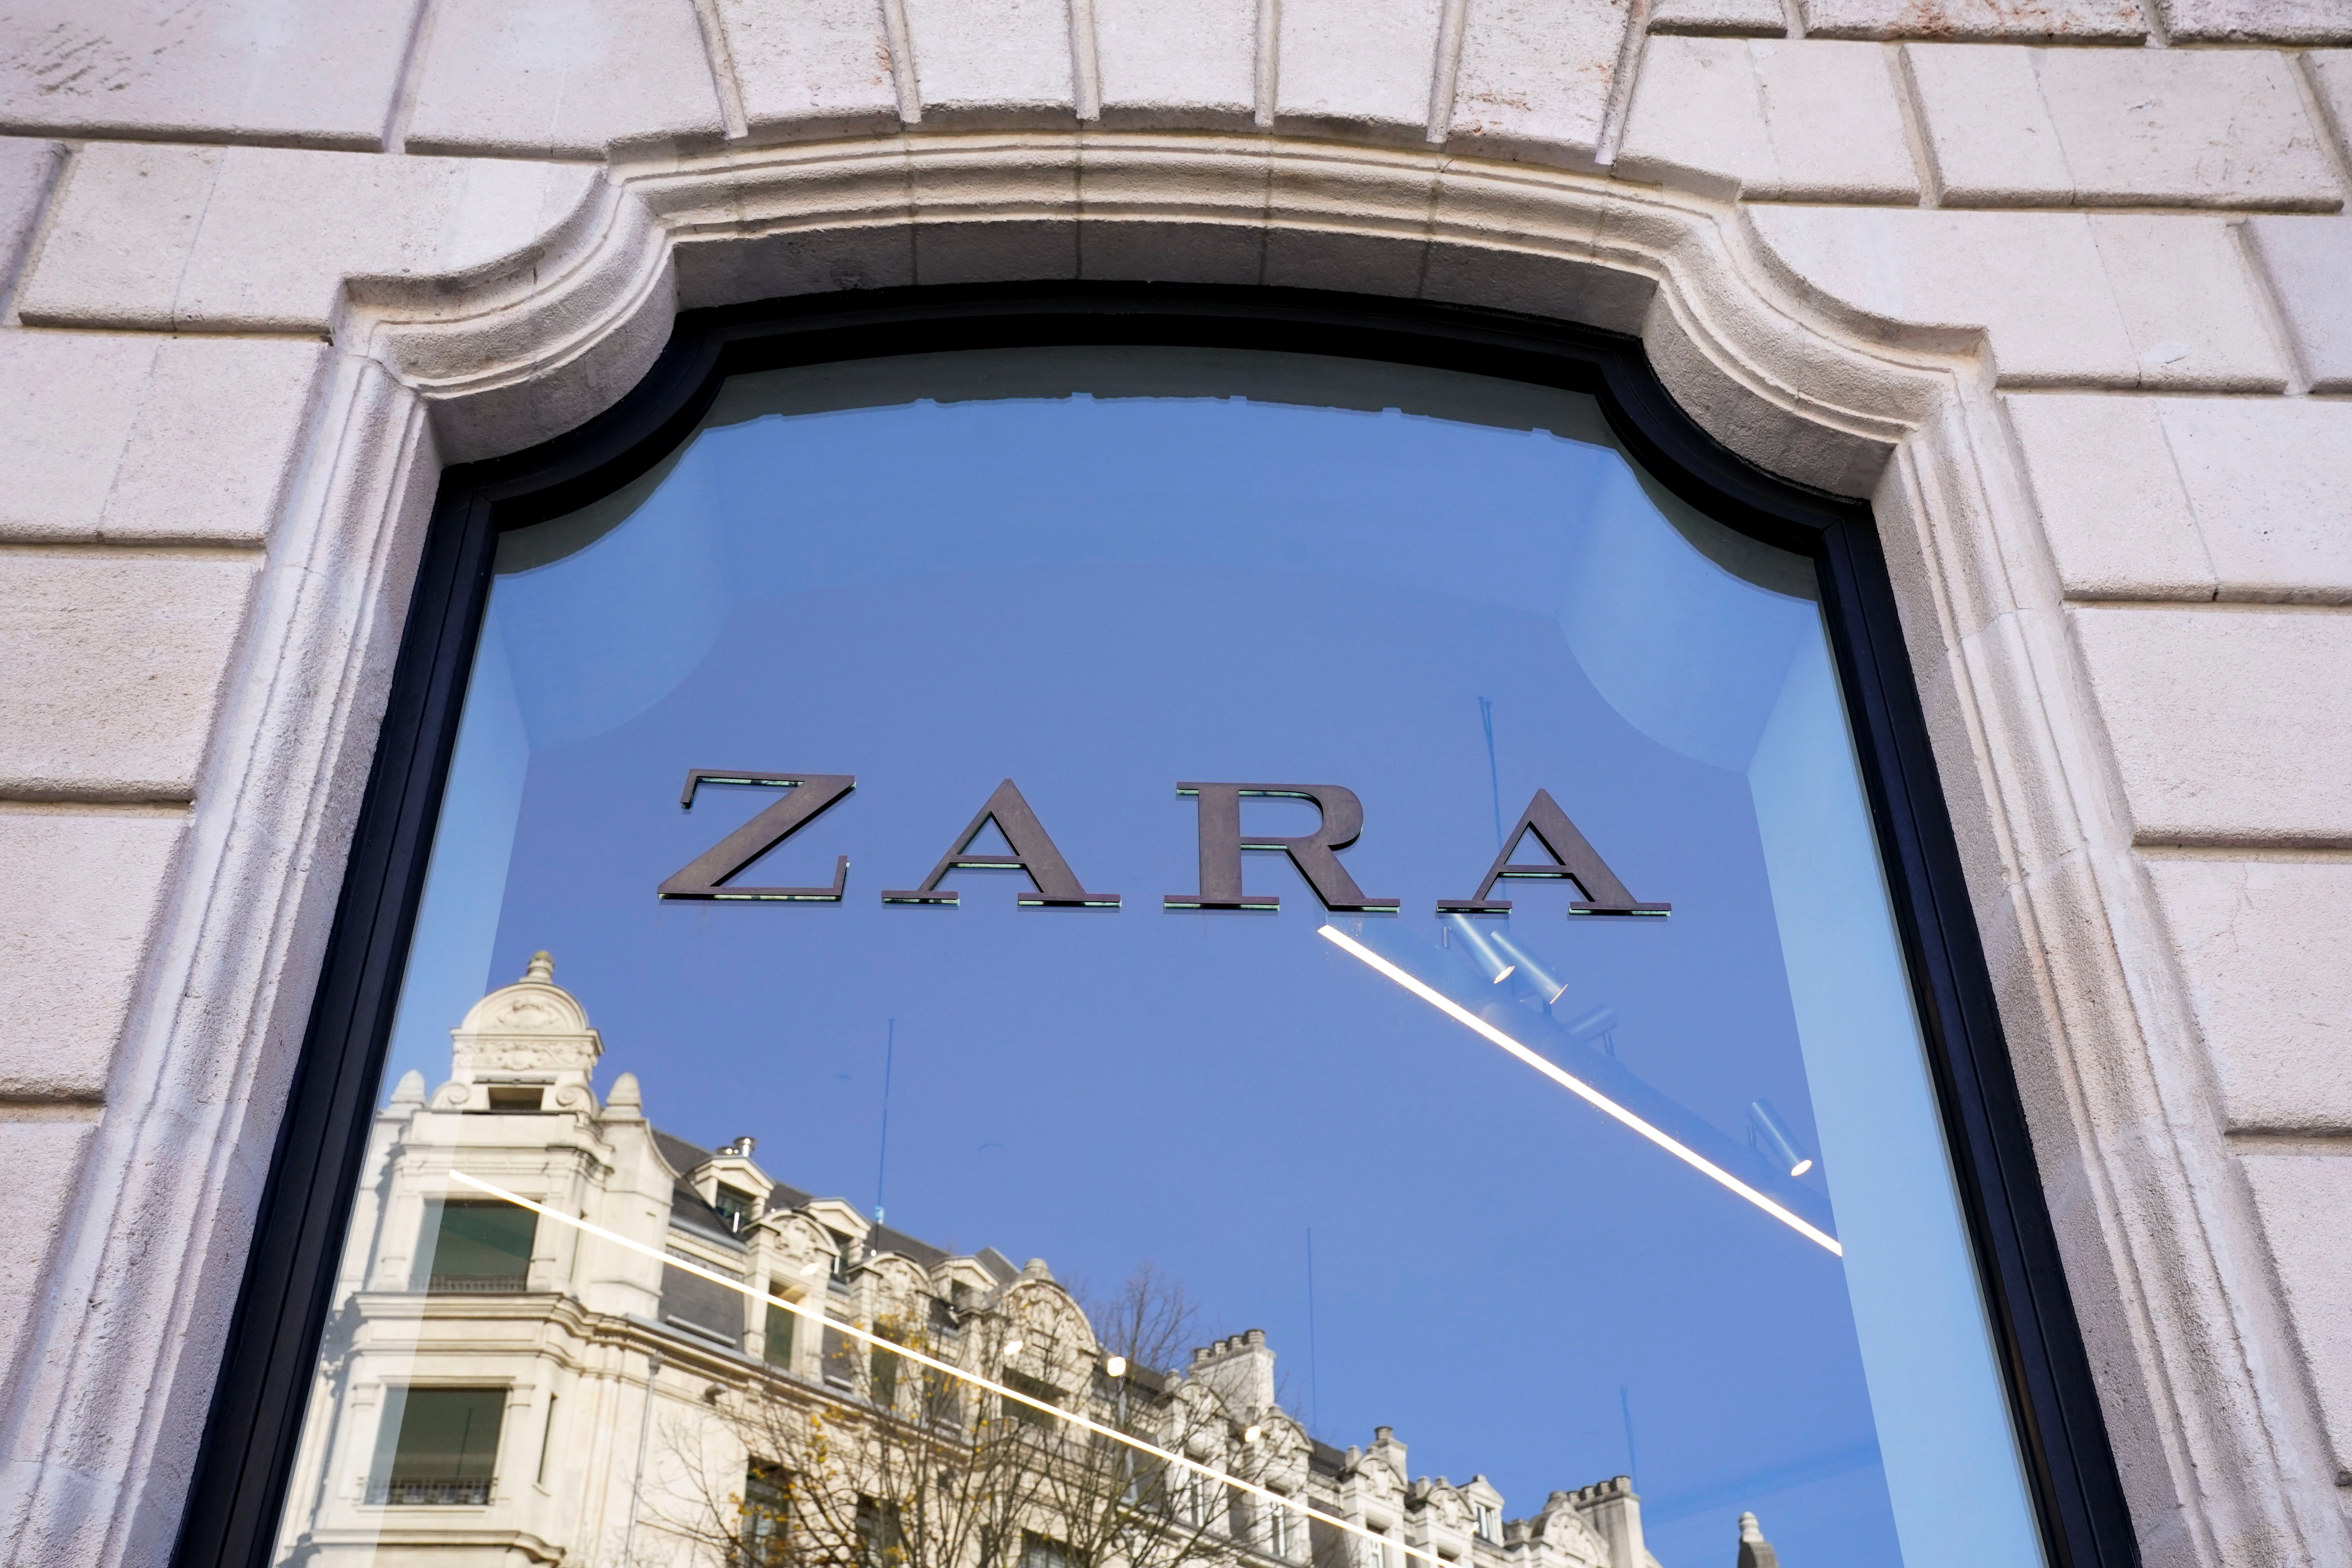 A building is reflected in the window of a Zara clothes store in Bilbao